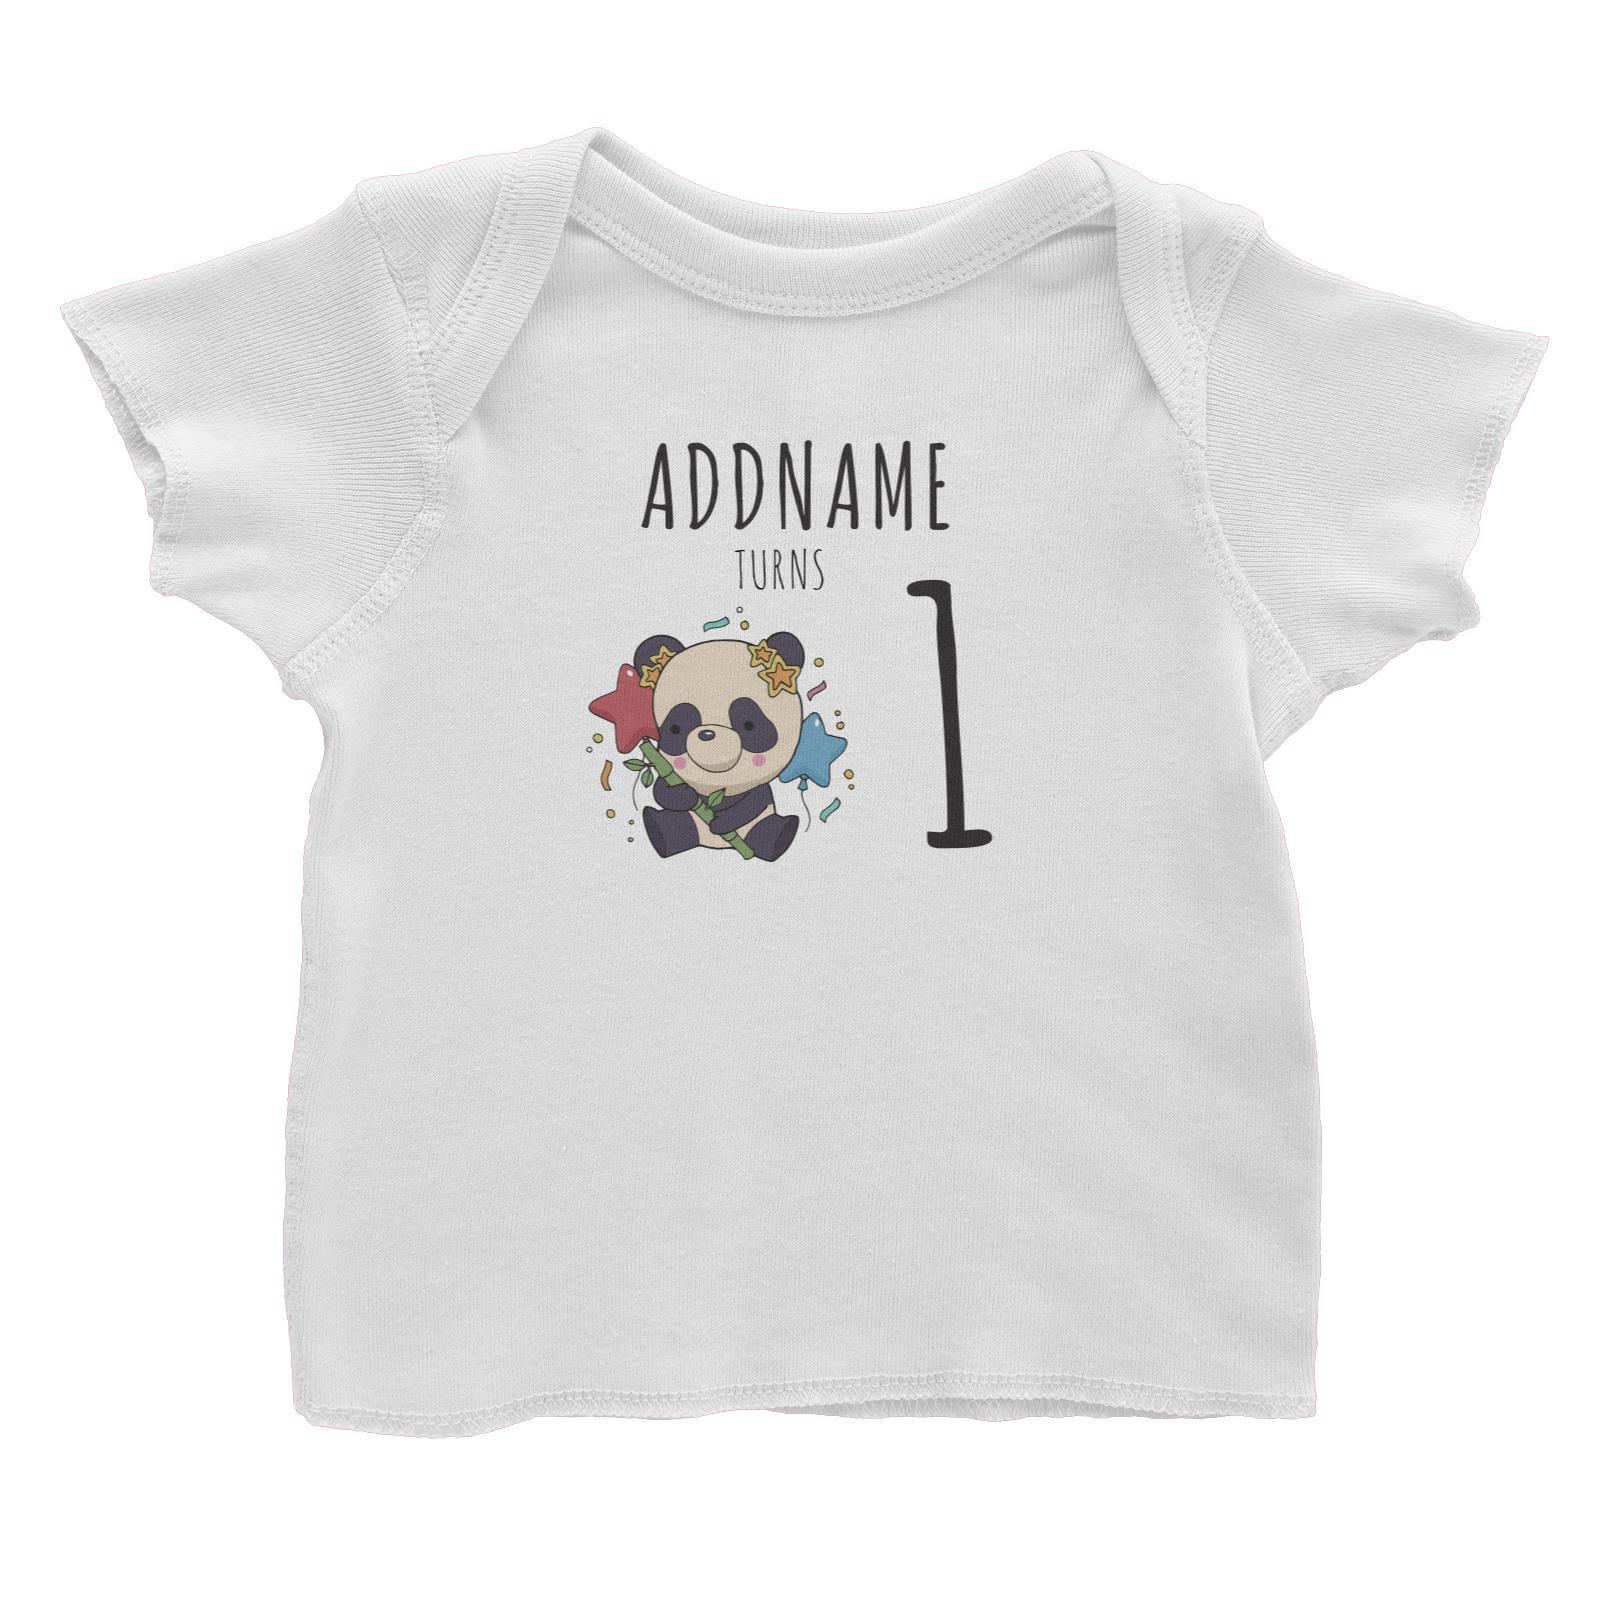 Birthday Sketch Animals Panda with Party Hat Holding Bamboo Addname Turns 1 Baby T-Shirt